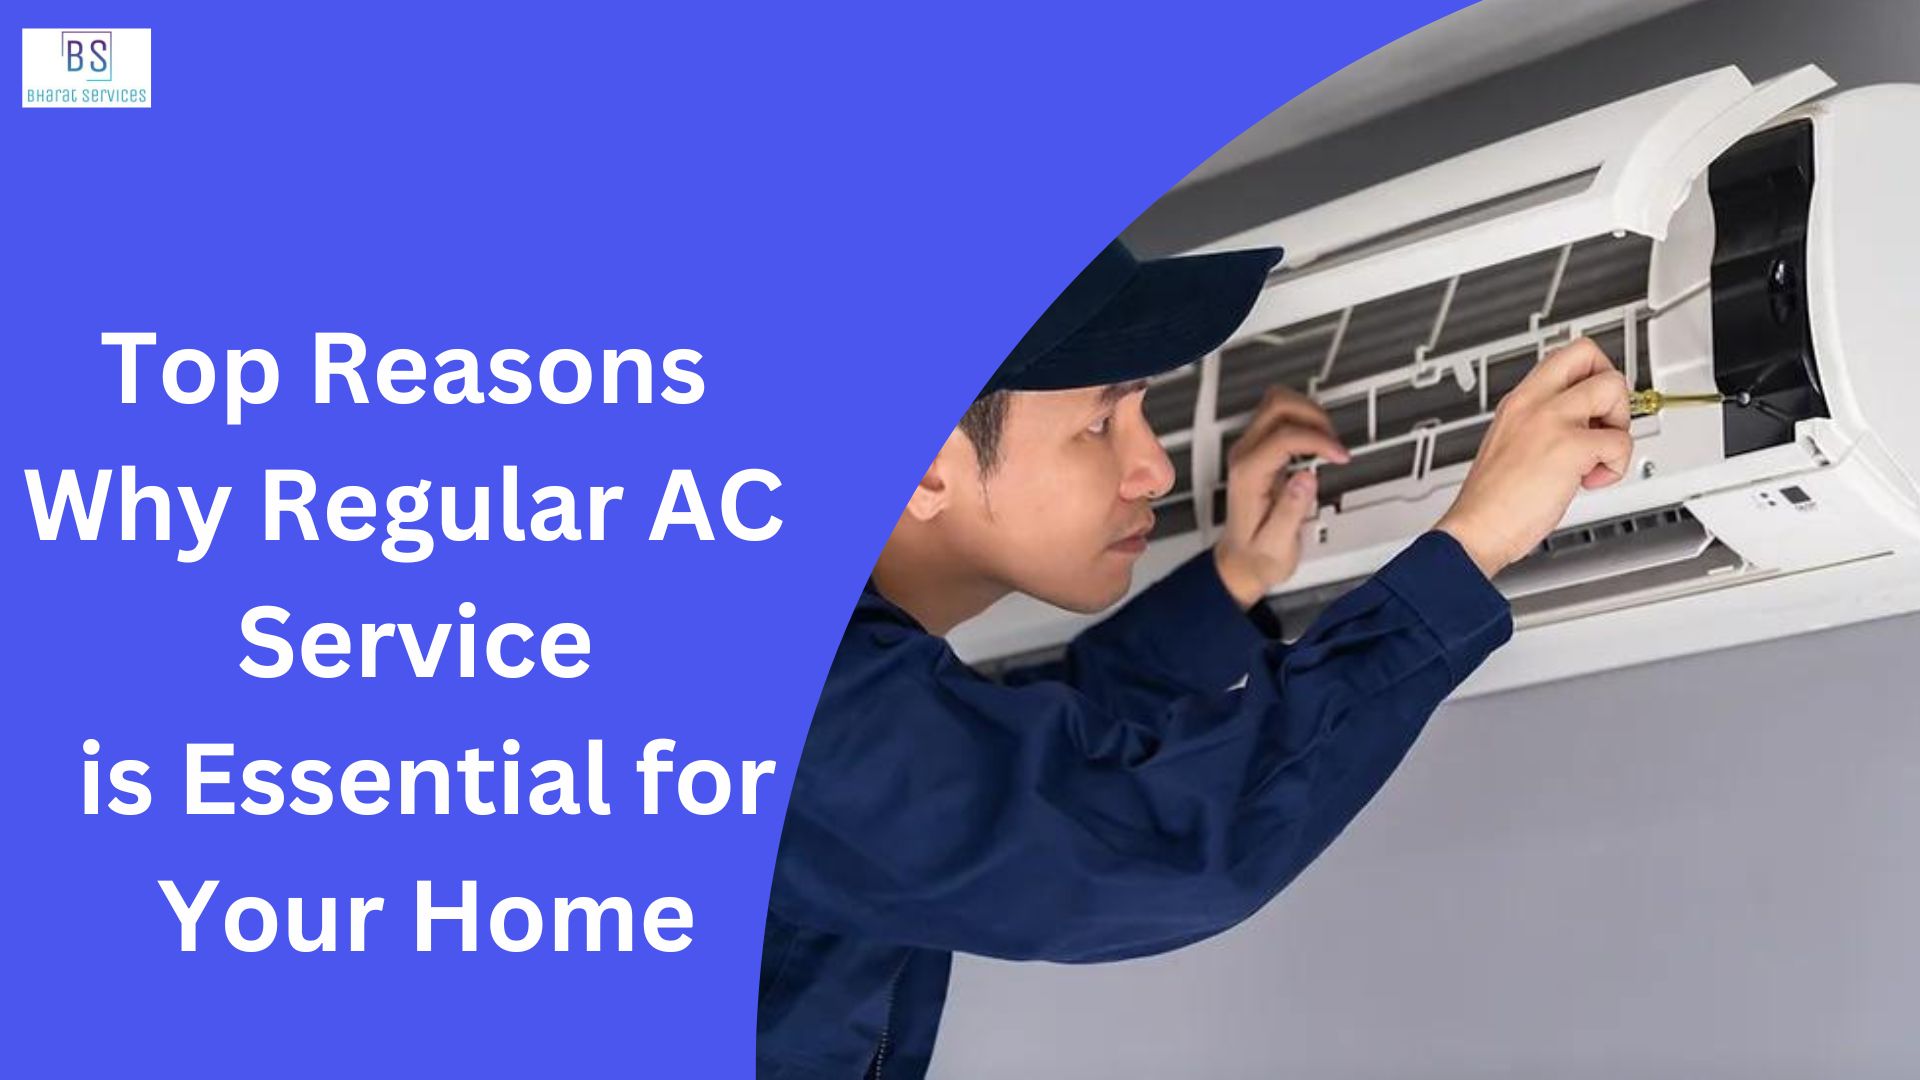 Top Reasons Why Regular AC Service is Essential for Your Home